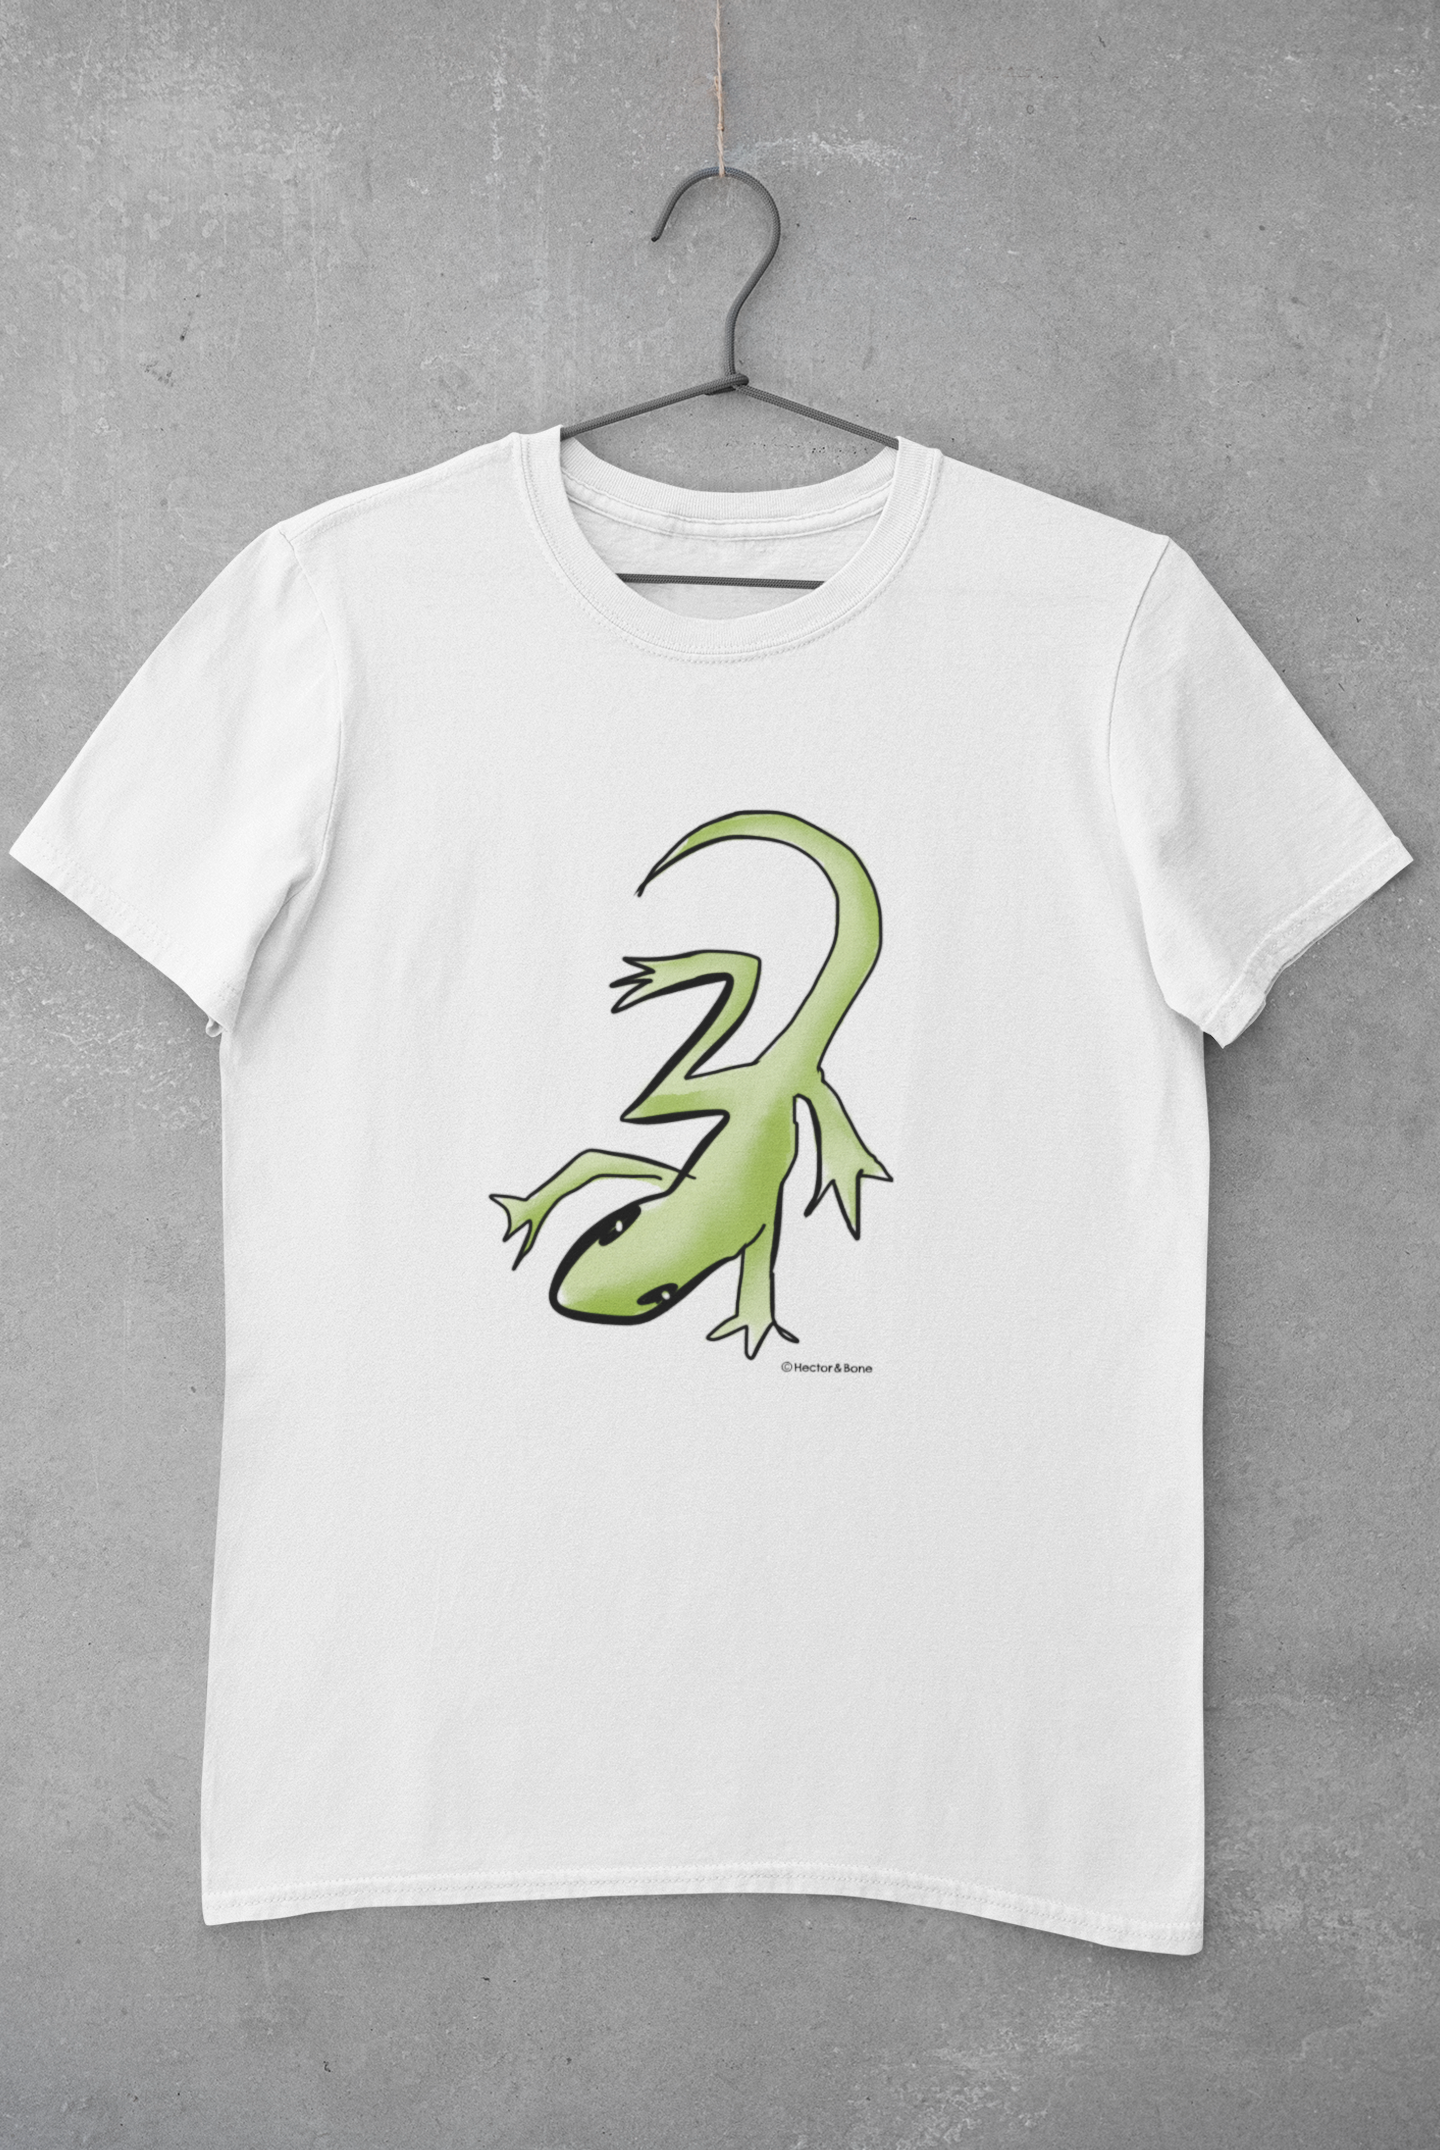 Lizard T-shirt - Illustrated Lounge Lizard T-shirt on white vegan cotton by Hector and Bone